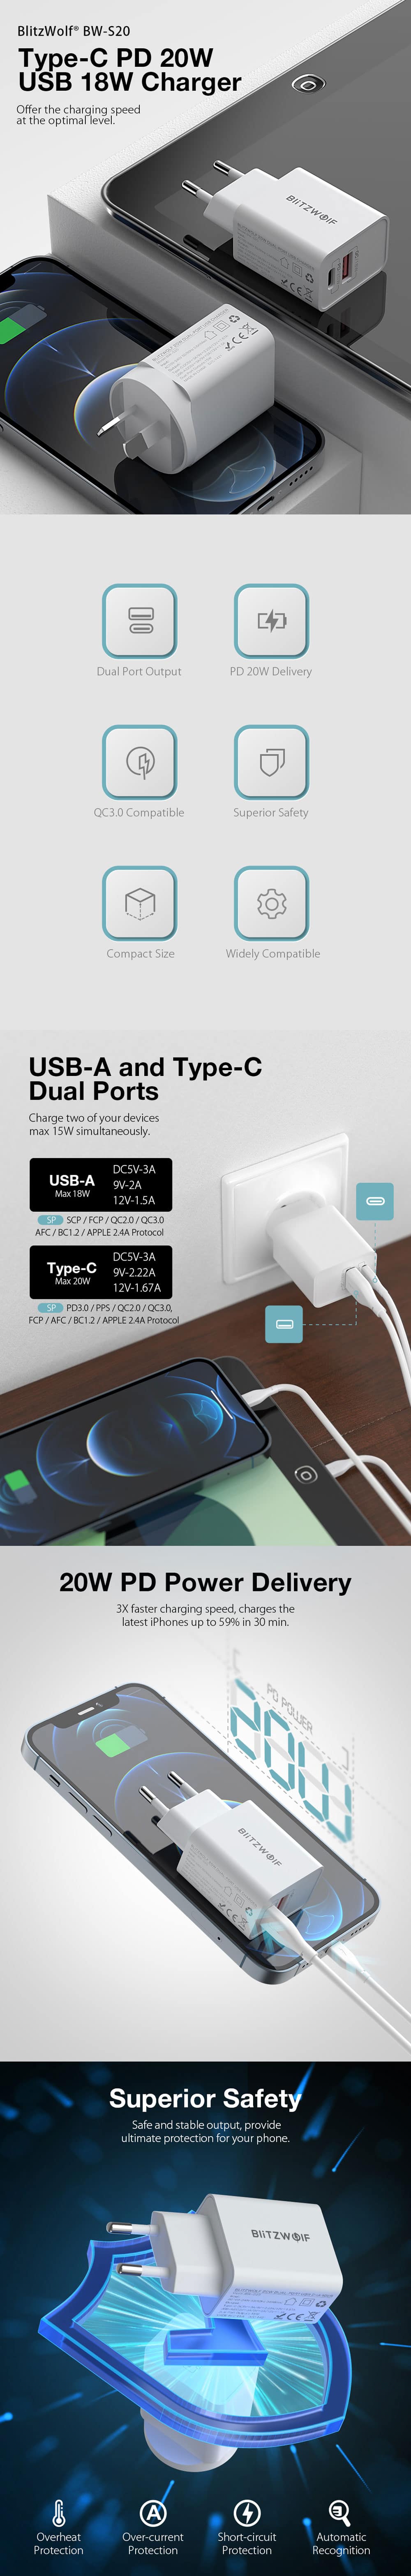 BlitzWolf BW S20 Type C PD 20W USB Charger 4